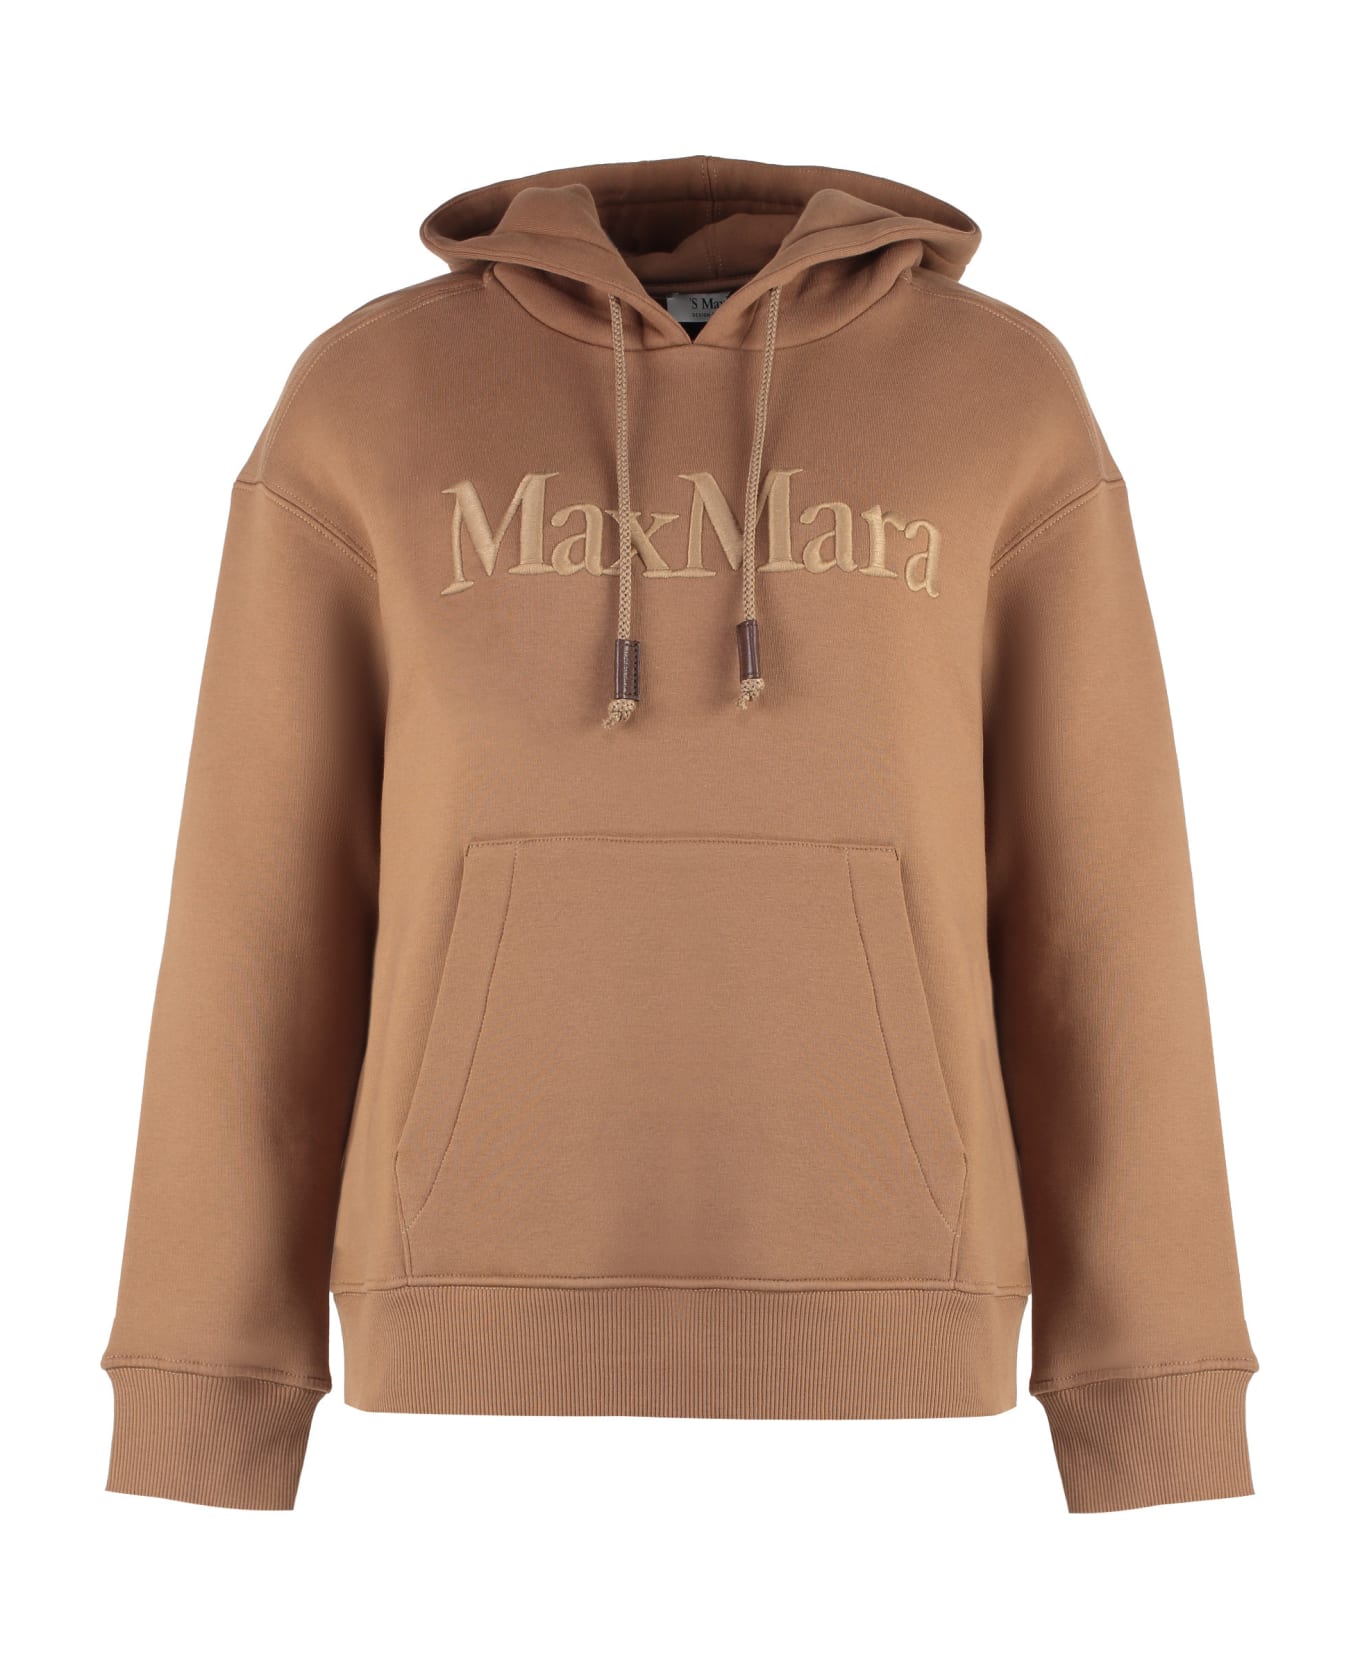 'S Max Mara Agre Cotton Hoodie - brown